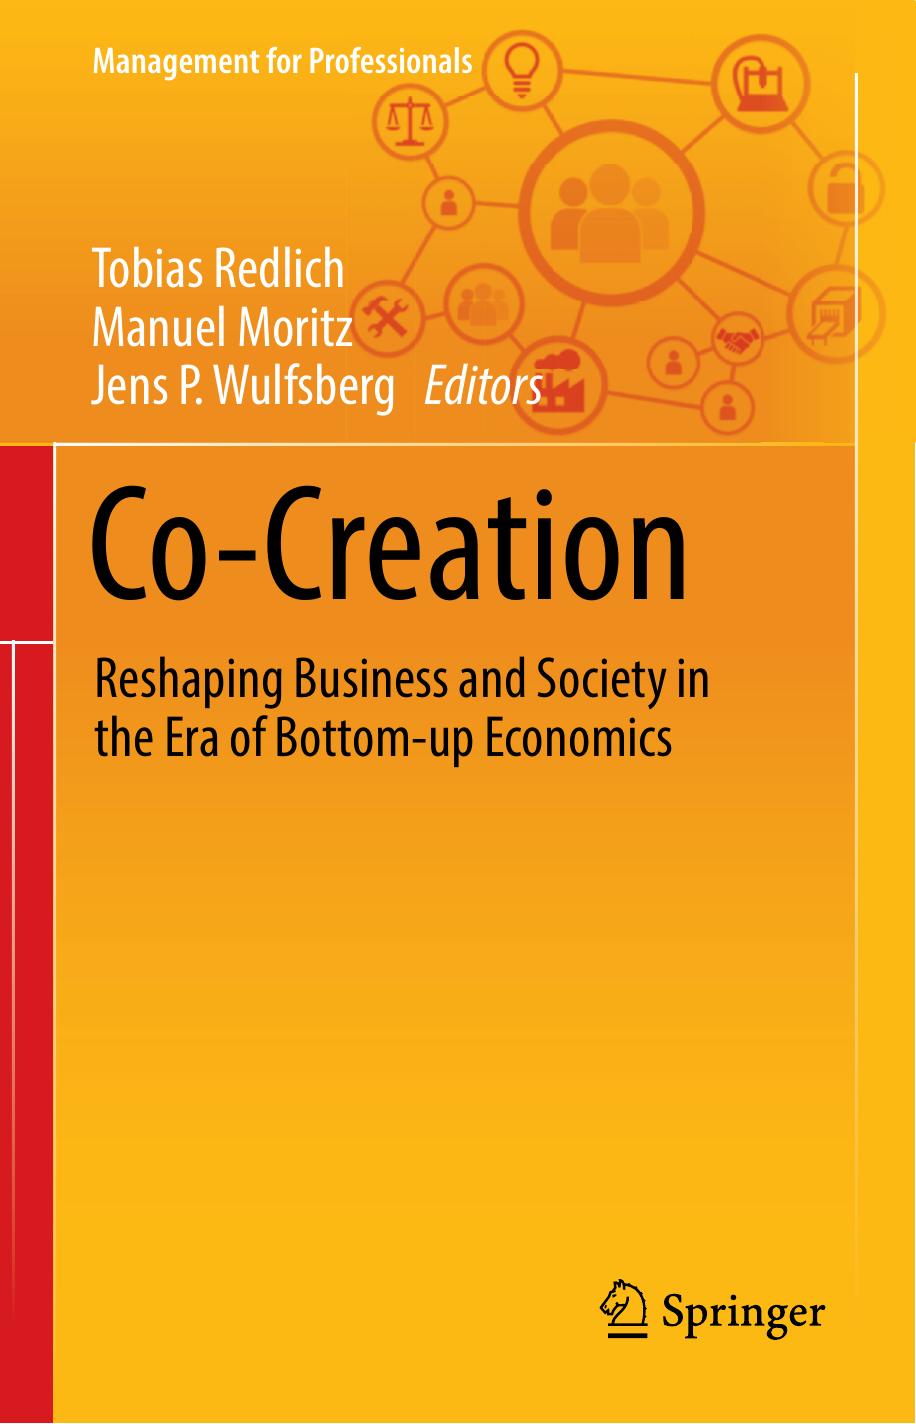 Co-Creation Reshaping Business and Society in the Era of Bottom-up Economics by Tobias Redlich, Manuel Moritz, Jens P. Wulfsberg 2019